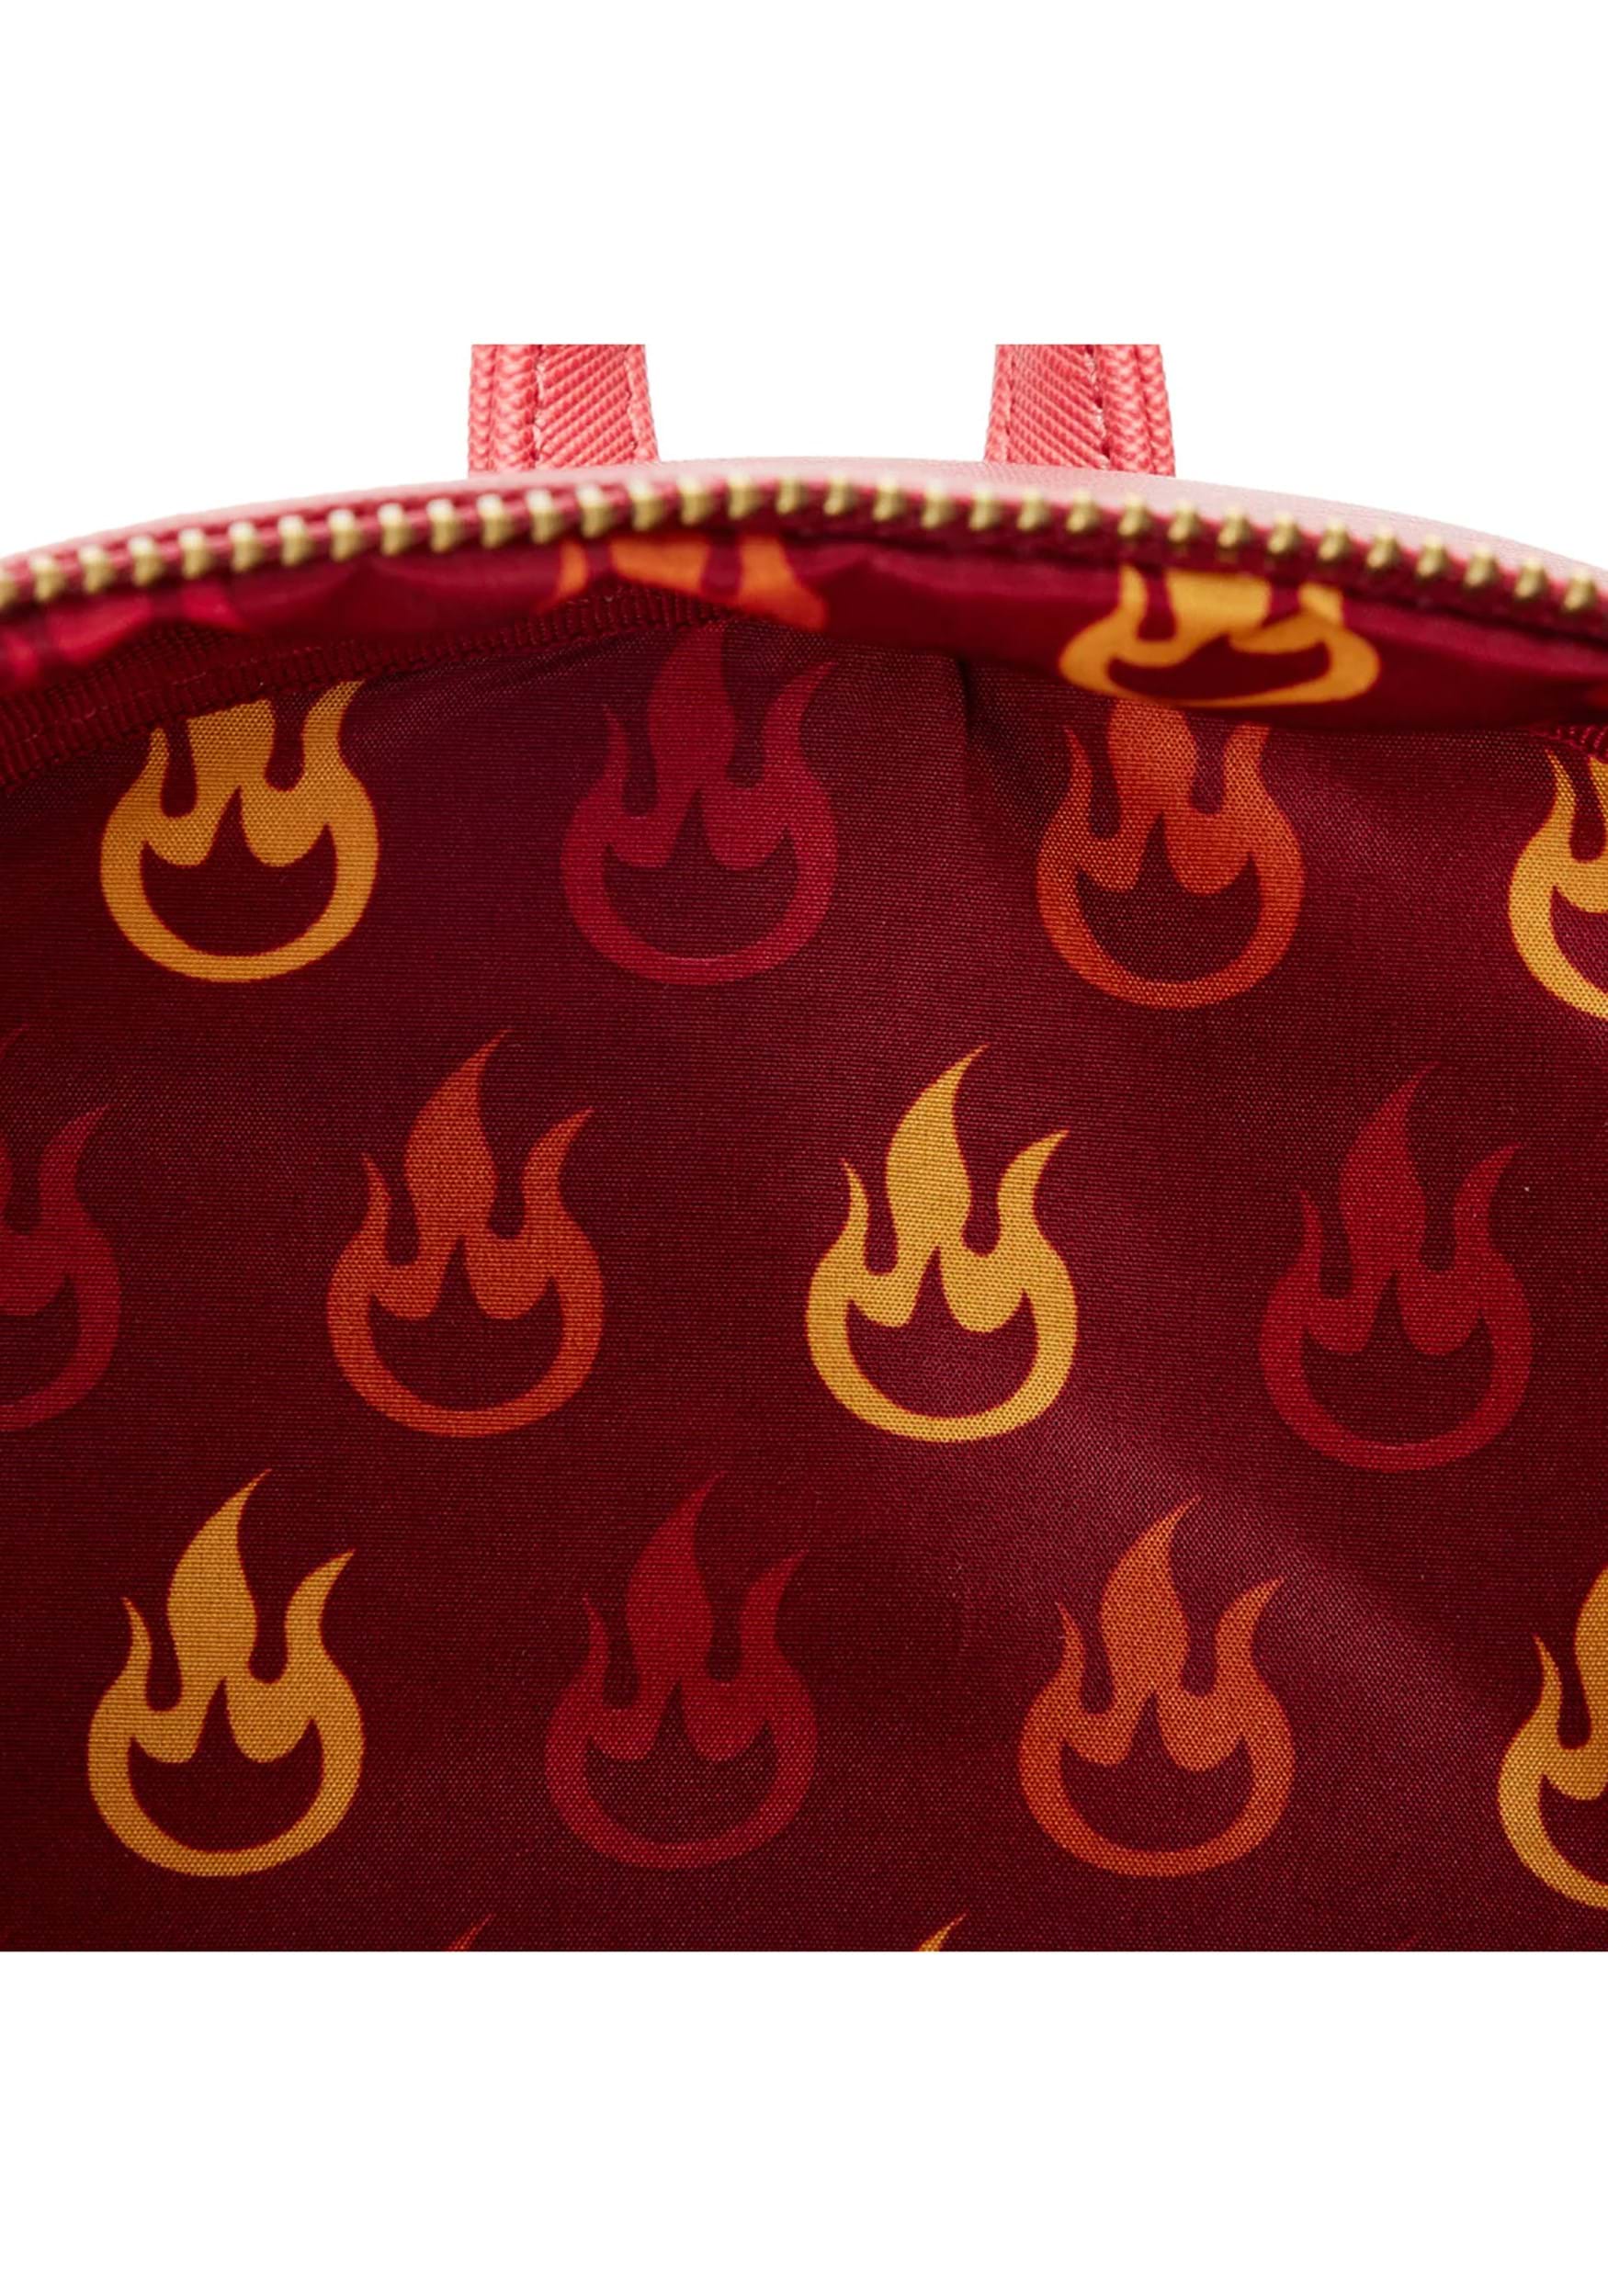 Louis Vuitton Face Mask Red - $10 (50% Off Retail) New With Tags - From Thu